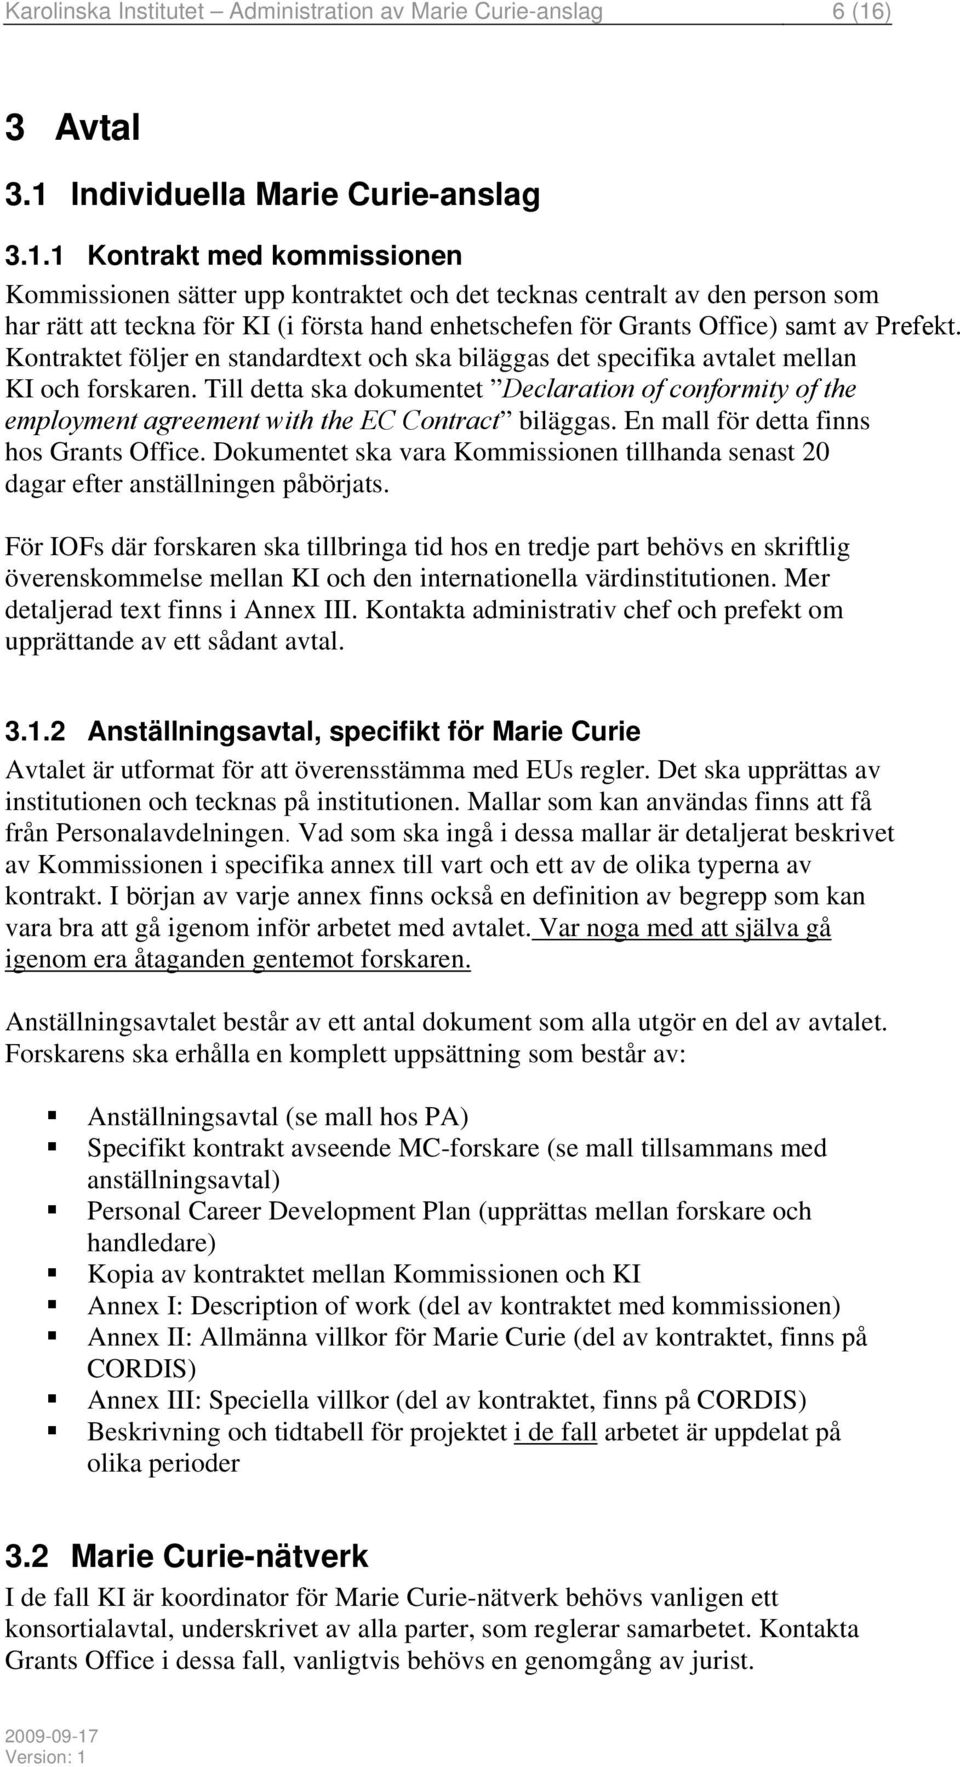 Individuella Marie Curie-anslag 3.1.